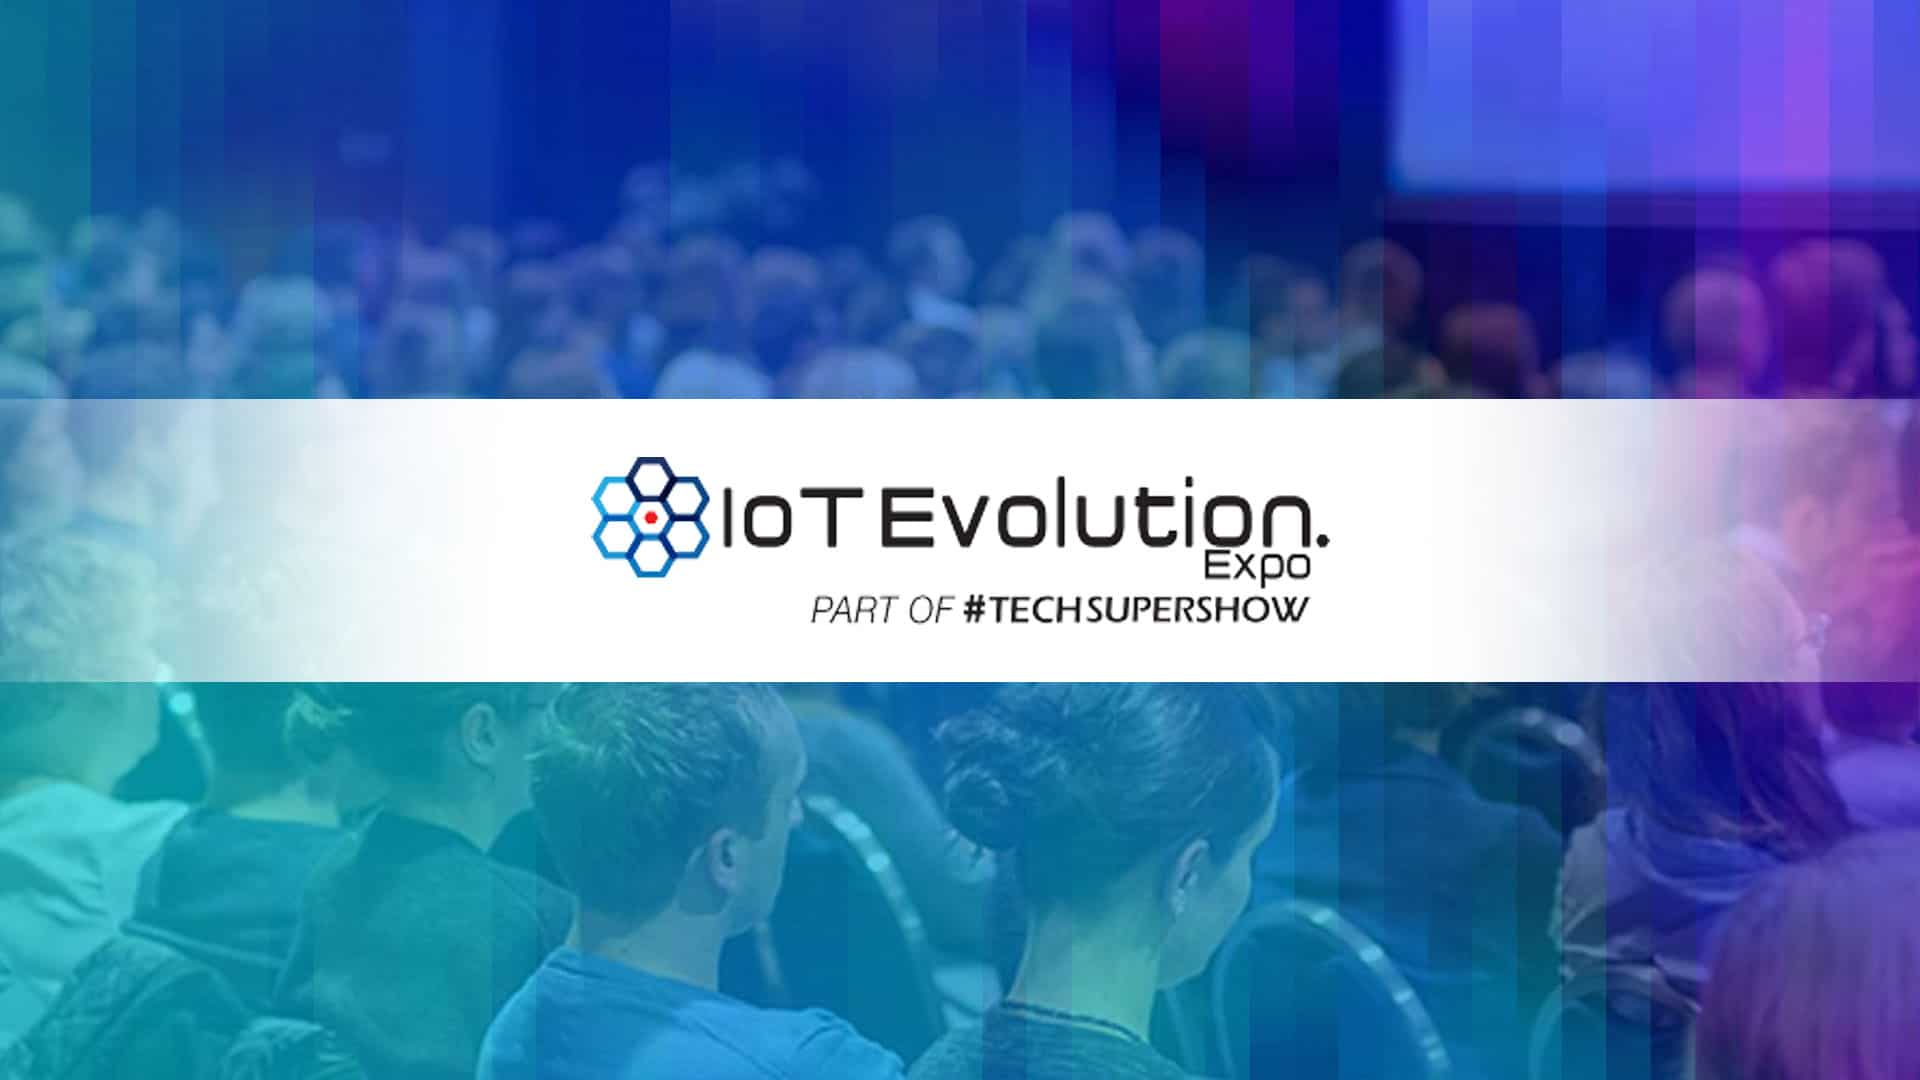 IoT Evolution Expo Logo with background image showing crowd of attendees